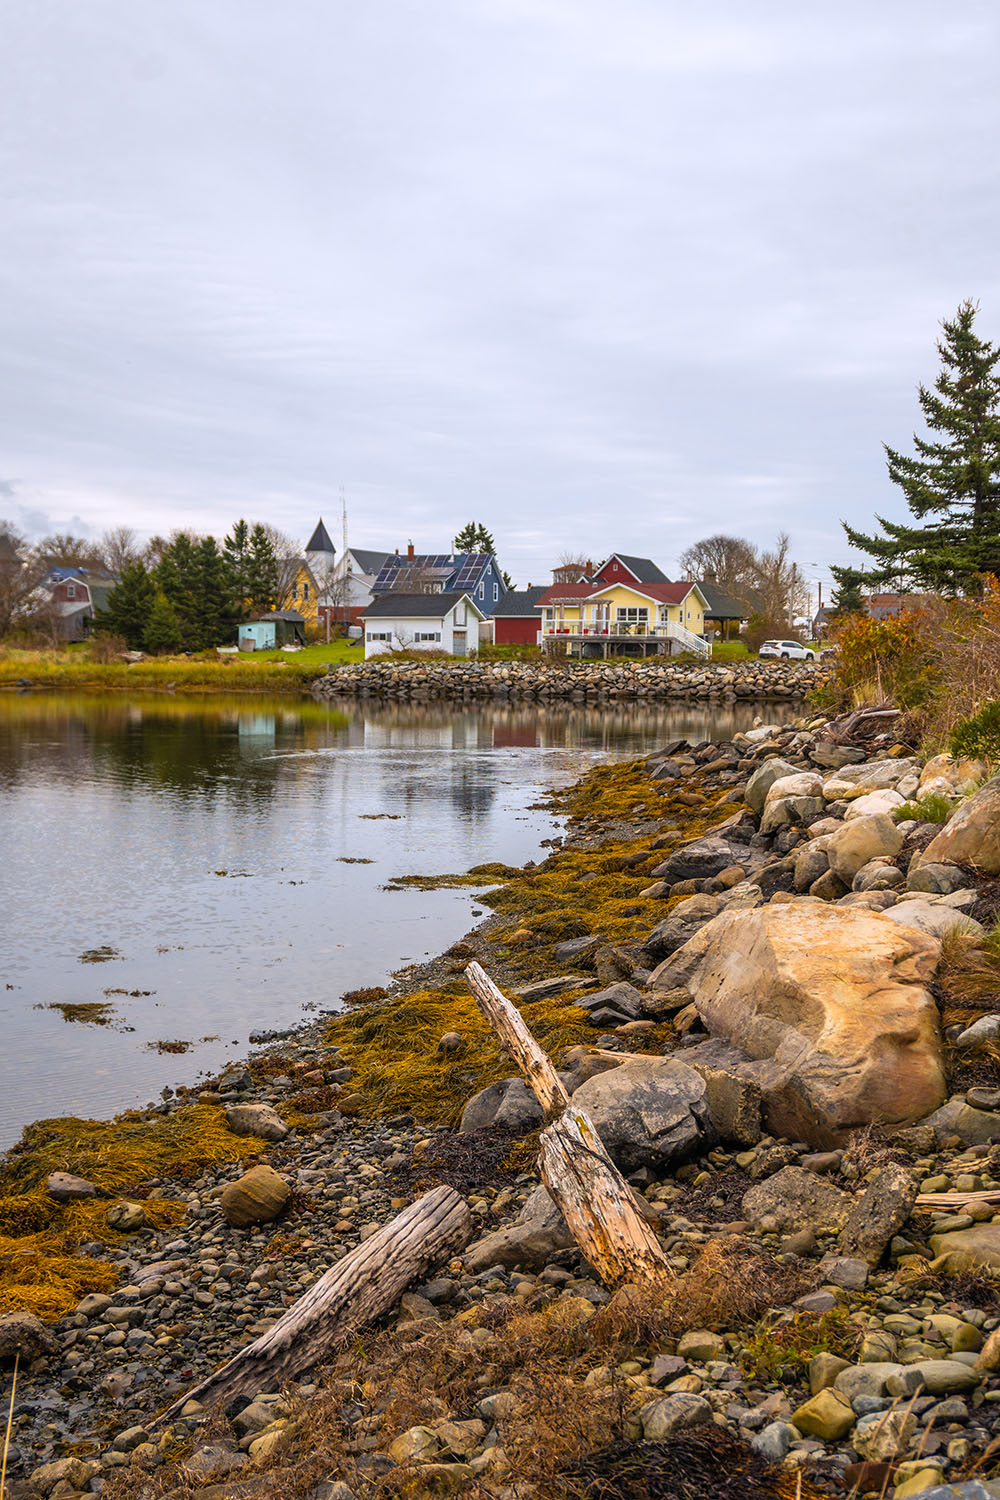 Shelburne County, Nova Scotia is an absolutely charming Canadian destination with so much to offer. Here you’ll find the most amazing seafood, incredible beaches, adorable lighthouses, seaside cottages, and the friendliest of locals. If you’re planning a trip to Shelburne County soon, this guide to the best things to do in Shelburne County is for you! This guide covers everything to do in Shelburne County, from Barrington to Shelburne, and beautiful Lockeport. Pictured here: Lockeport Trail